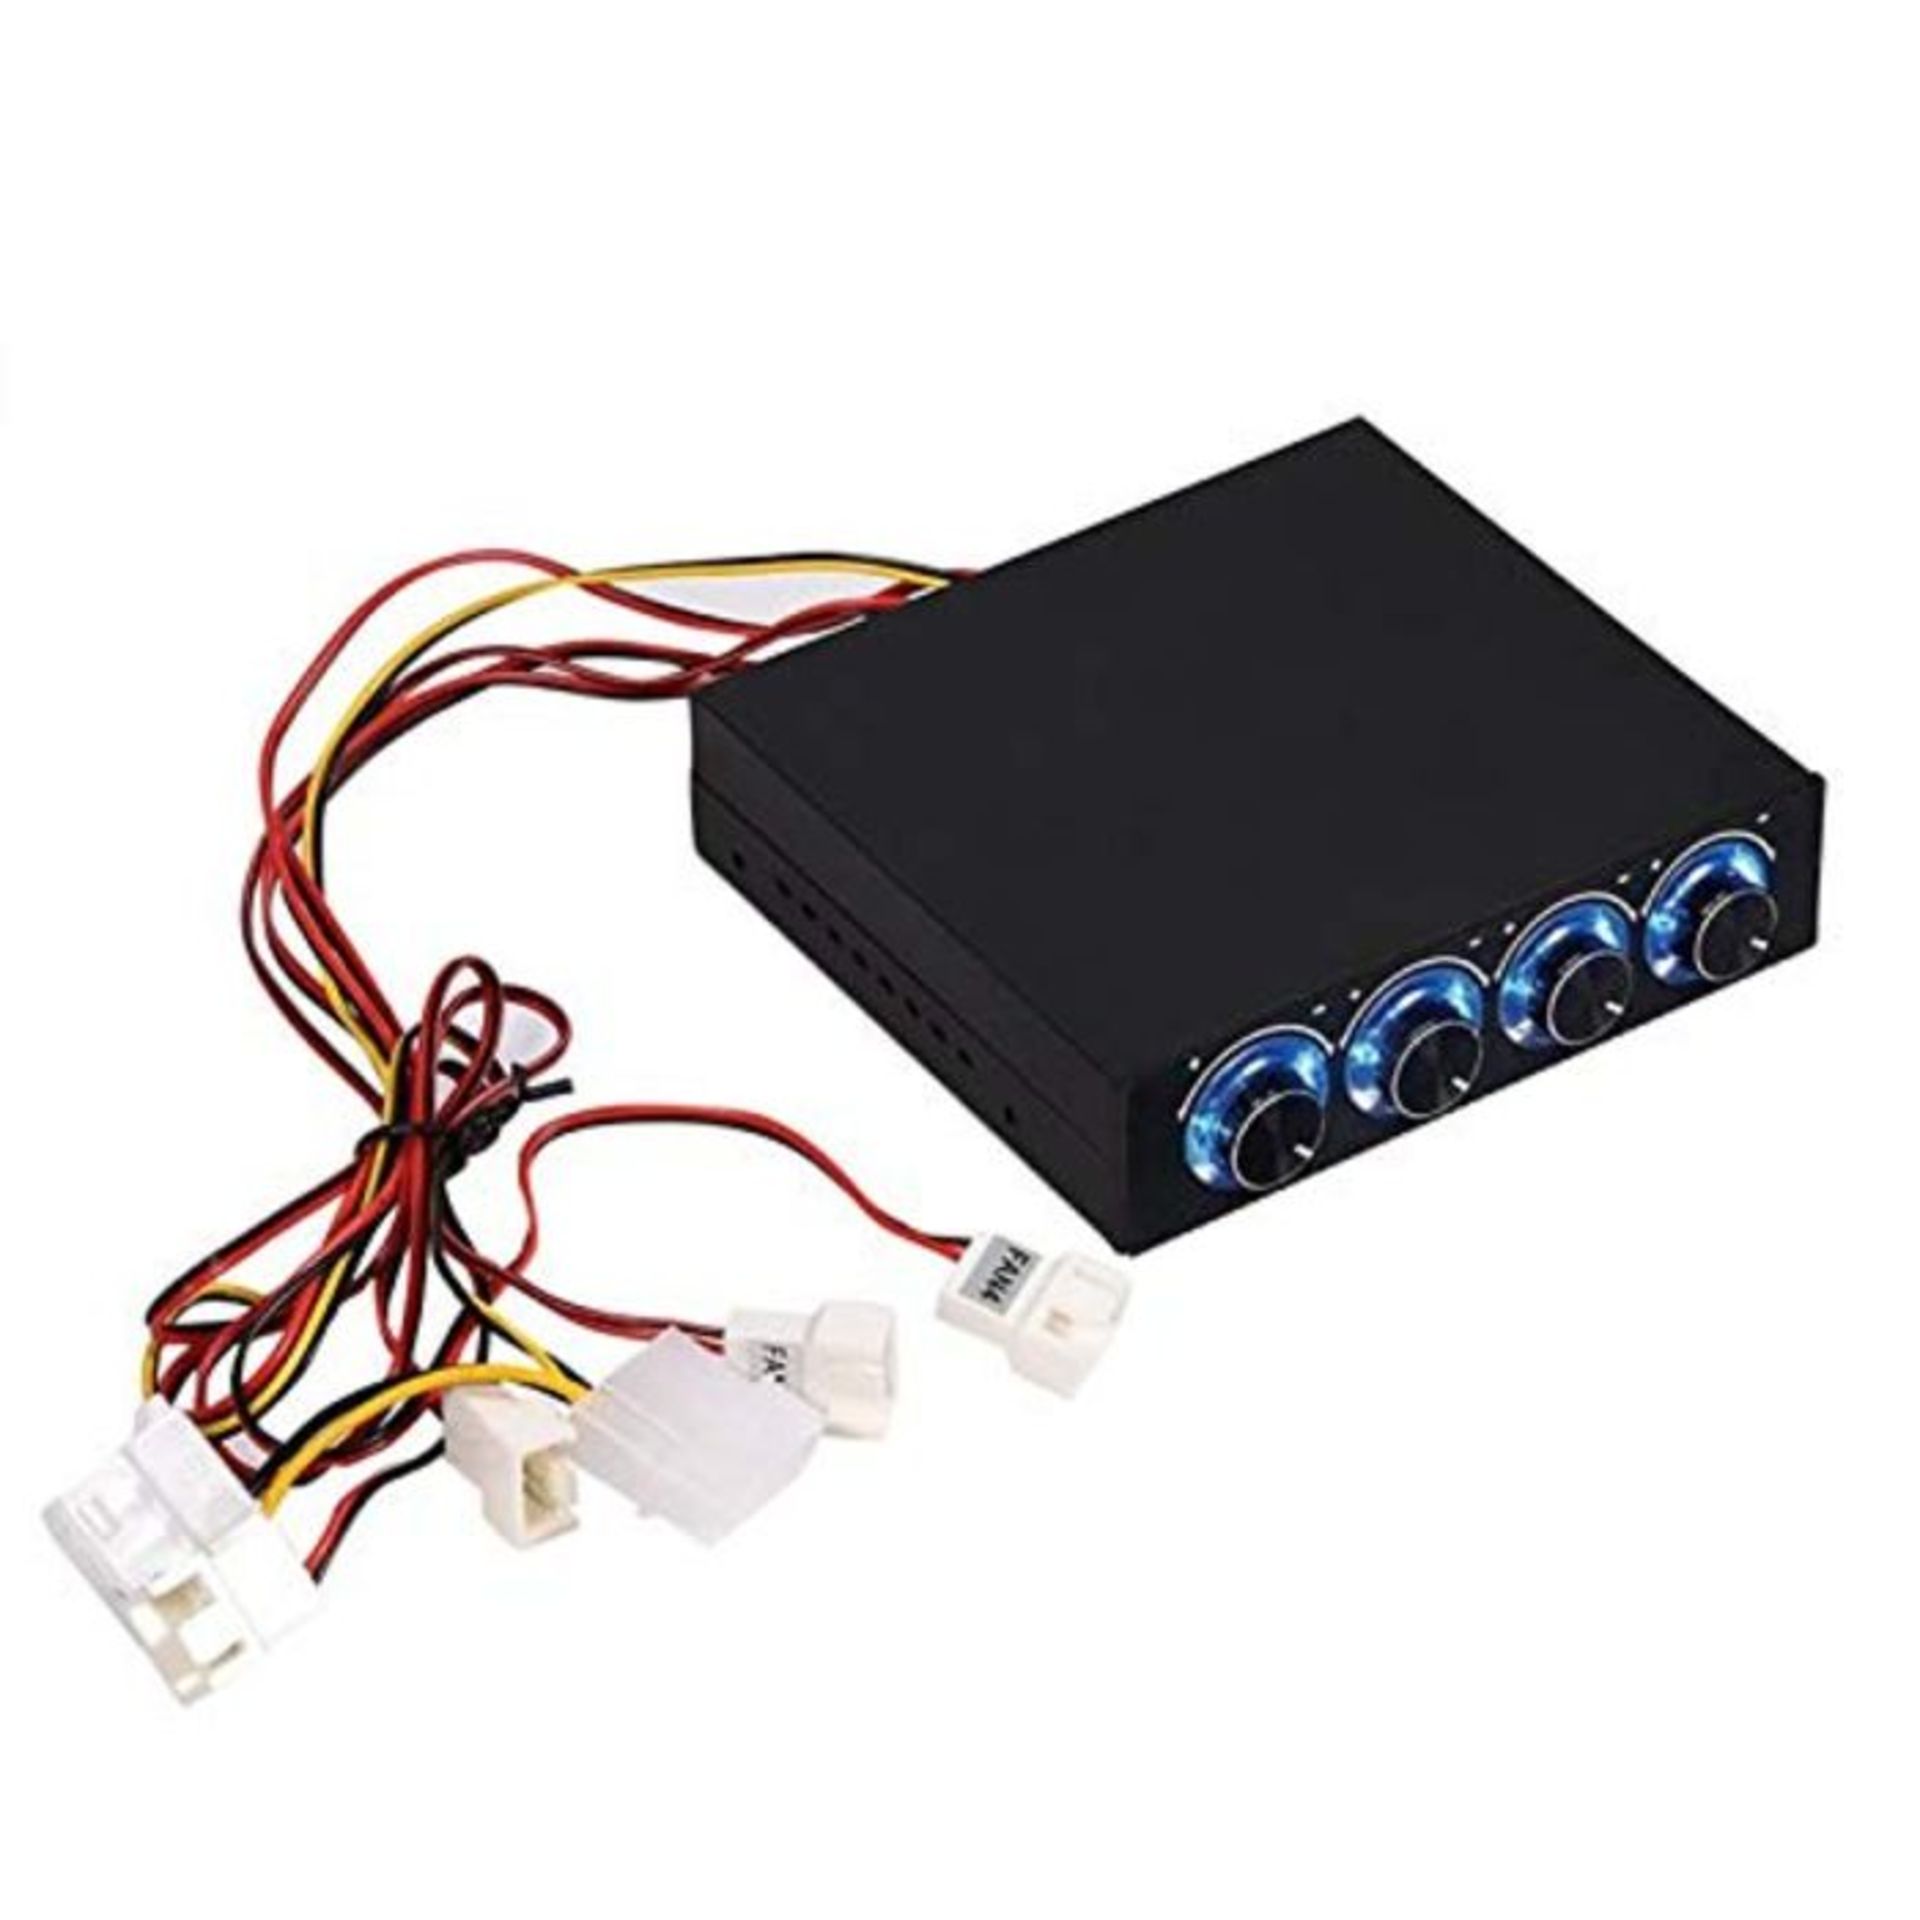 Vbestlife 4 Channel Computer Fan Speed Temperature Controller Heat Reducing for PC Des